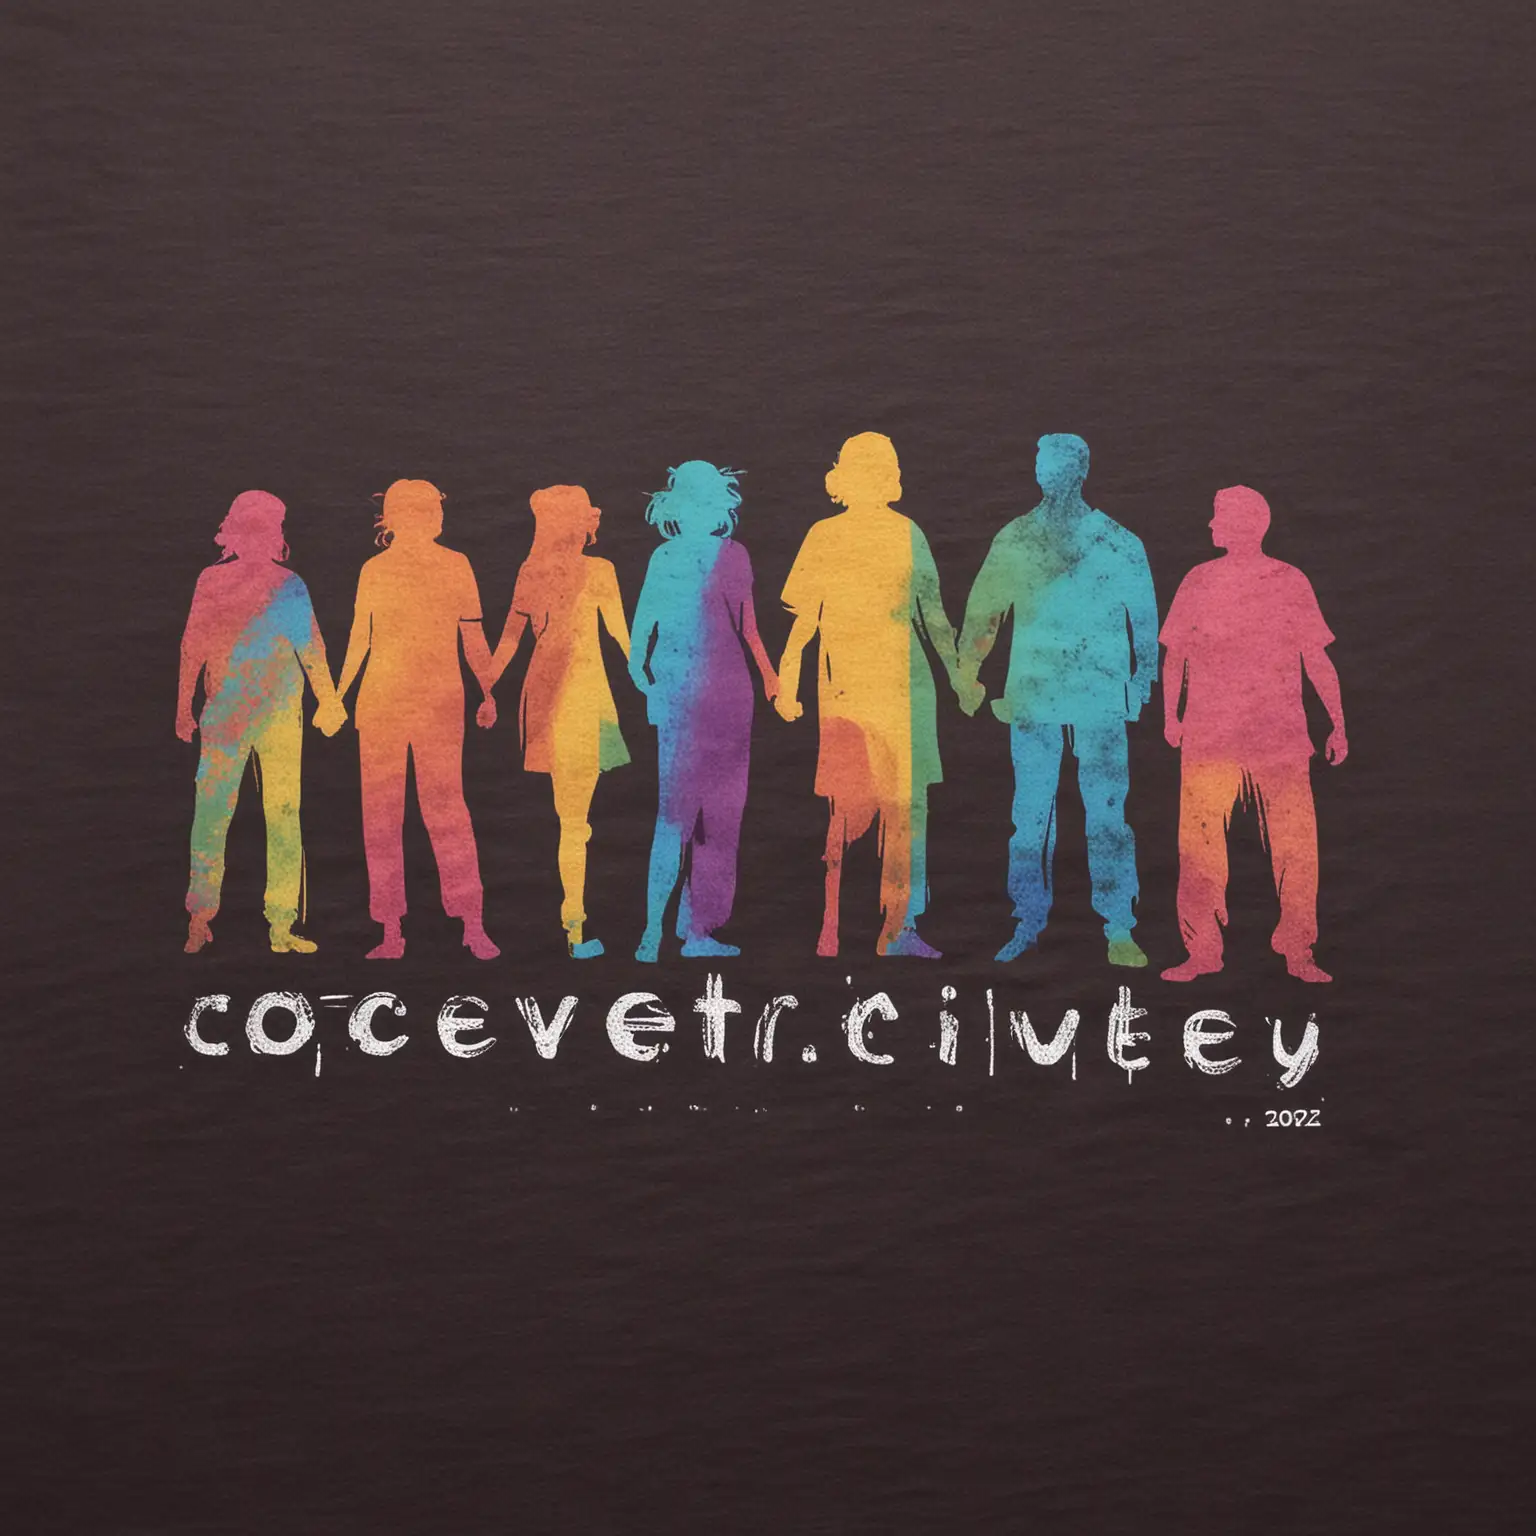 T-Shirt logo design. Silhouette. 3-5 Interesting people, with unique styles, and the text "Celebrate Diversity".

Tone: Vivid and colourful.
Style: Modern Boho.